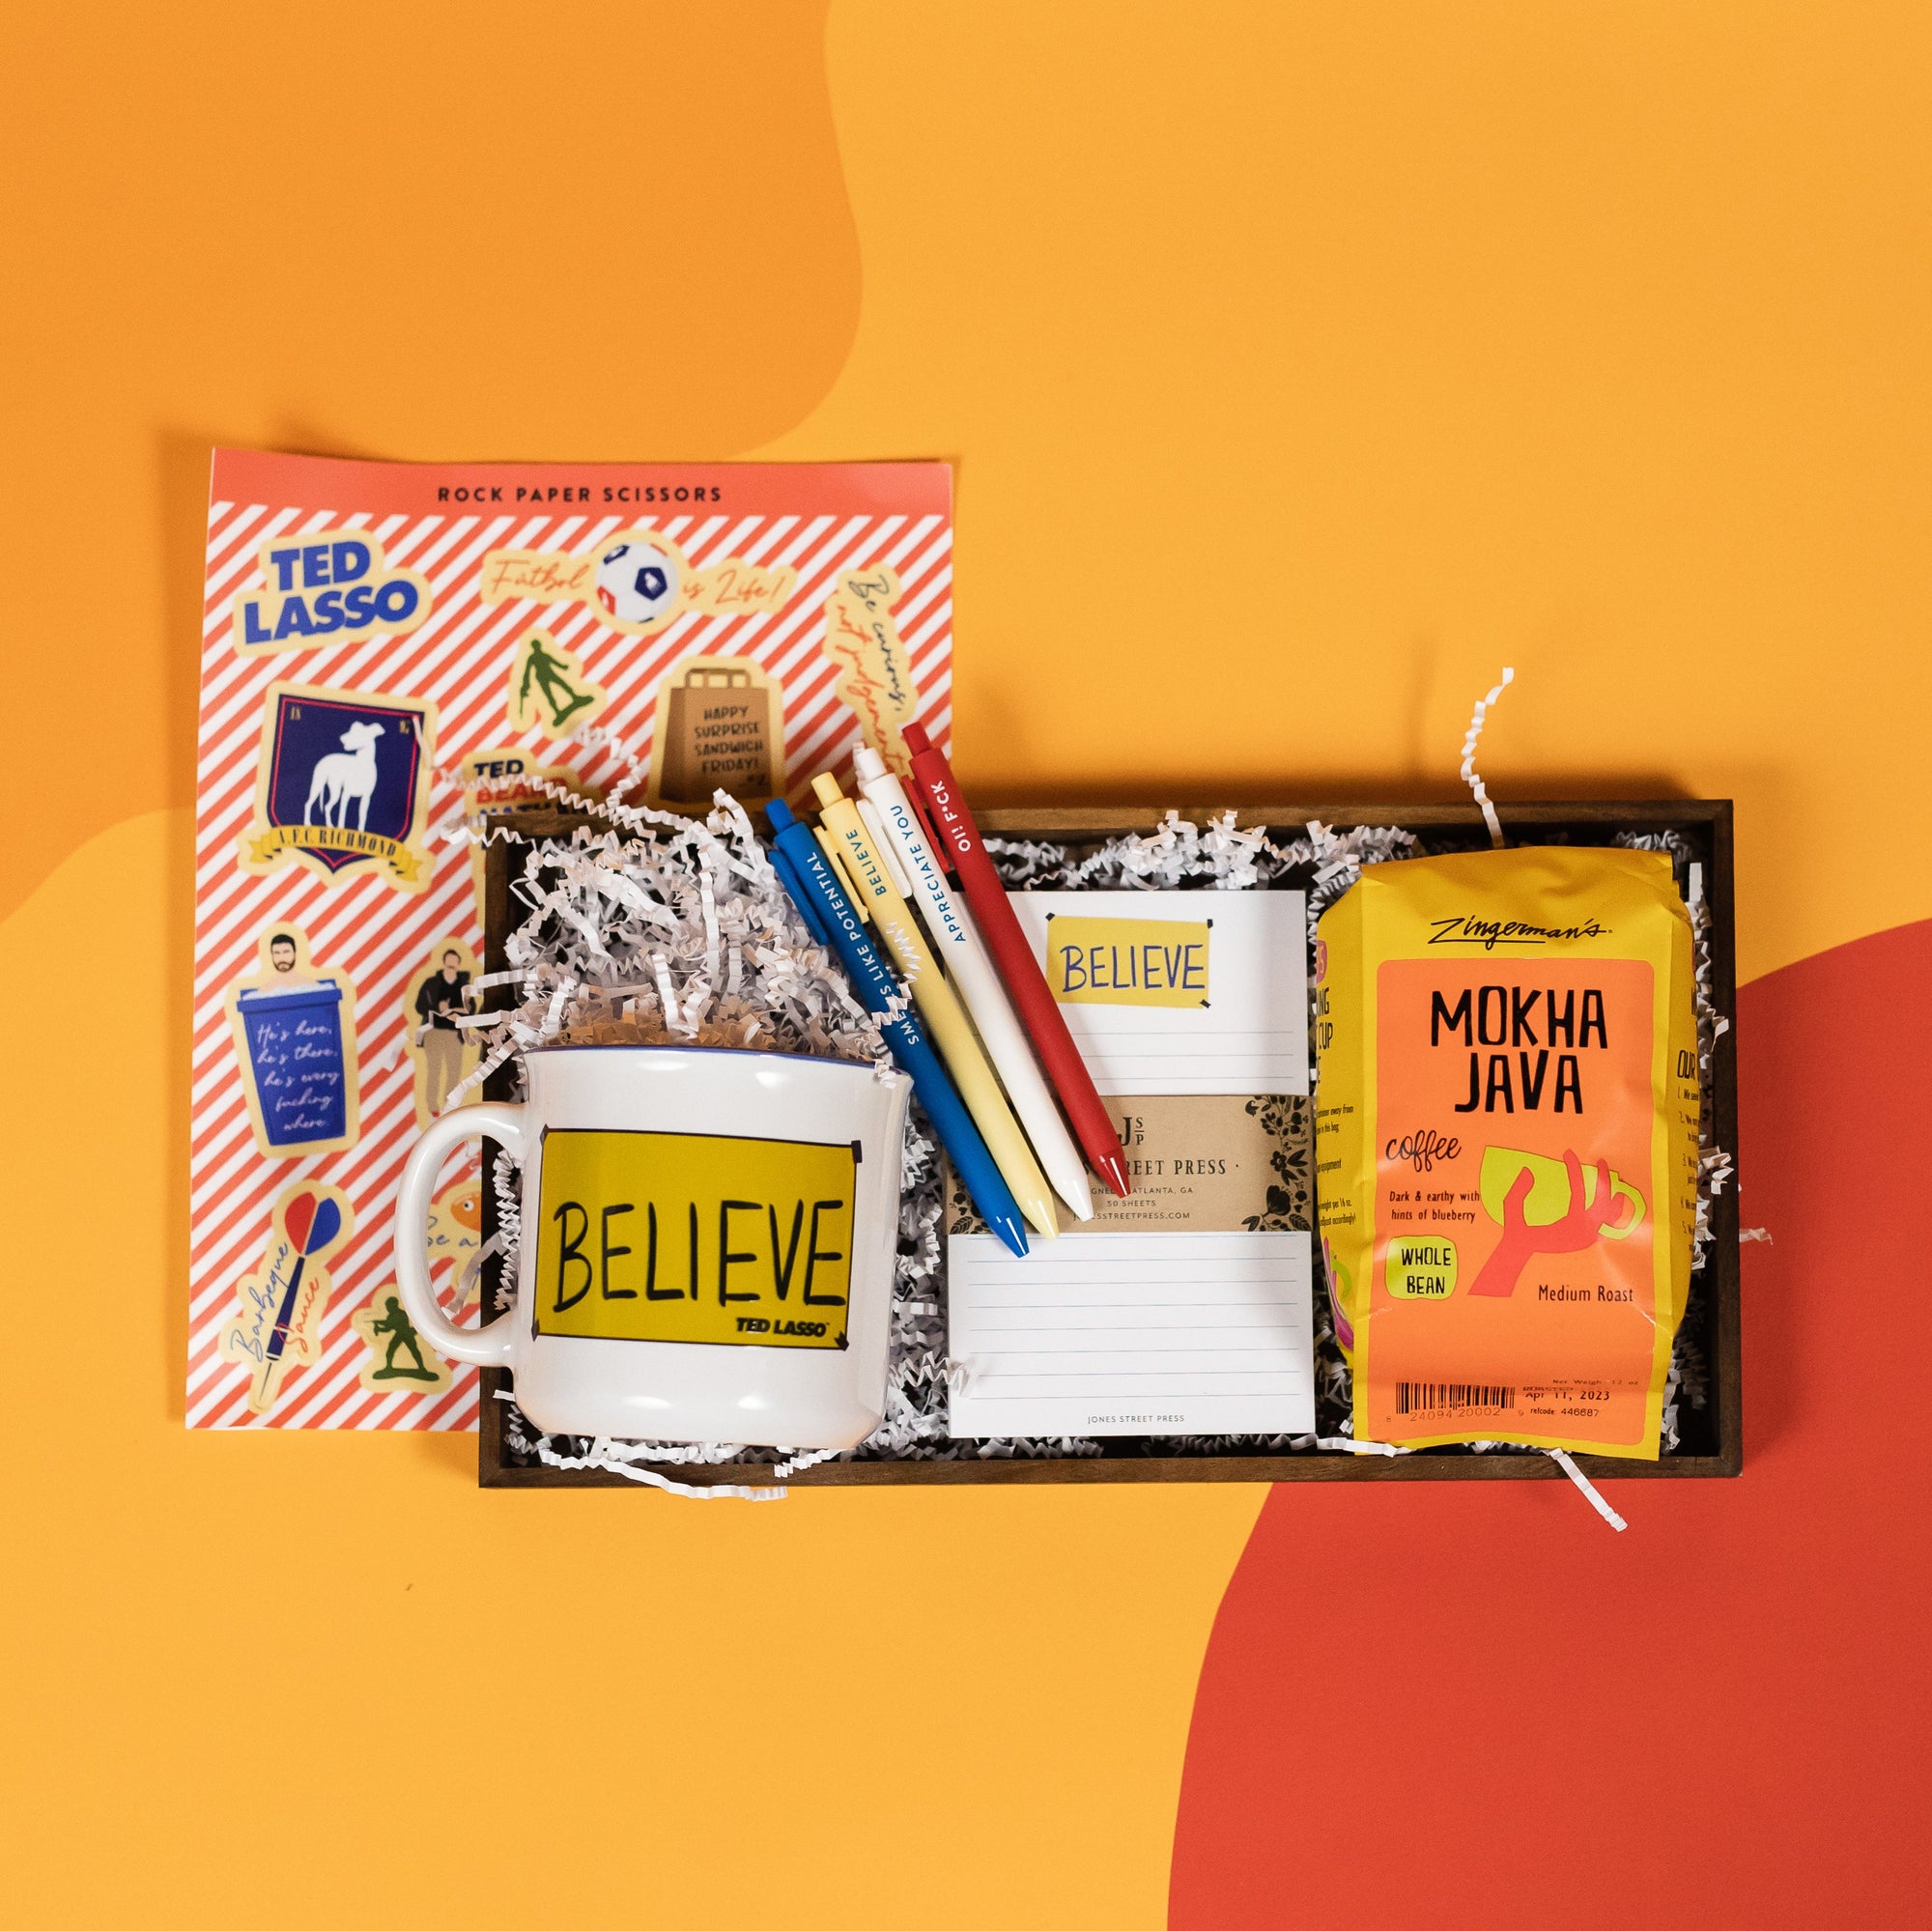 On a bright yellow background with orange and red cutouts sits a wooden tray with an assortment of Ted Lasso themed gifts and white krinkle. The products include a white mug with yellow "BELIEVE" banner illustrated on the side, an RPS Exclusive Ted Lasso sticker sheet, a set of four retractable gel pens with Ted Lasso sayings, a white lined notepad with the illustrated "BELIEVE" banner at the top and a bag of Zingerman's Mokha Java Medium Roast Whole Bean Coffee.